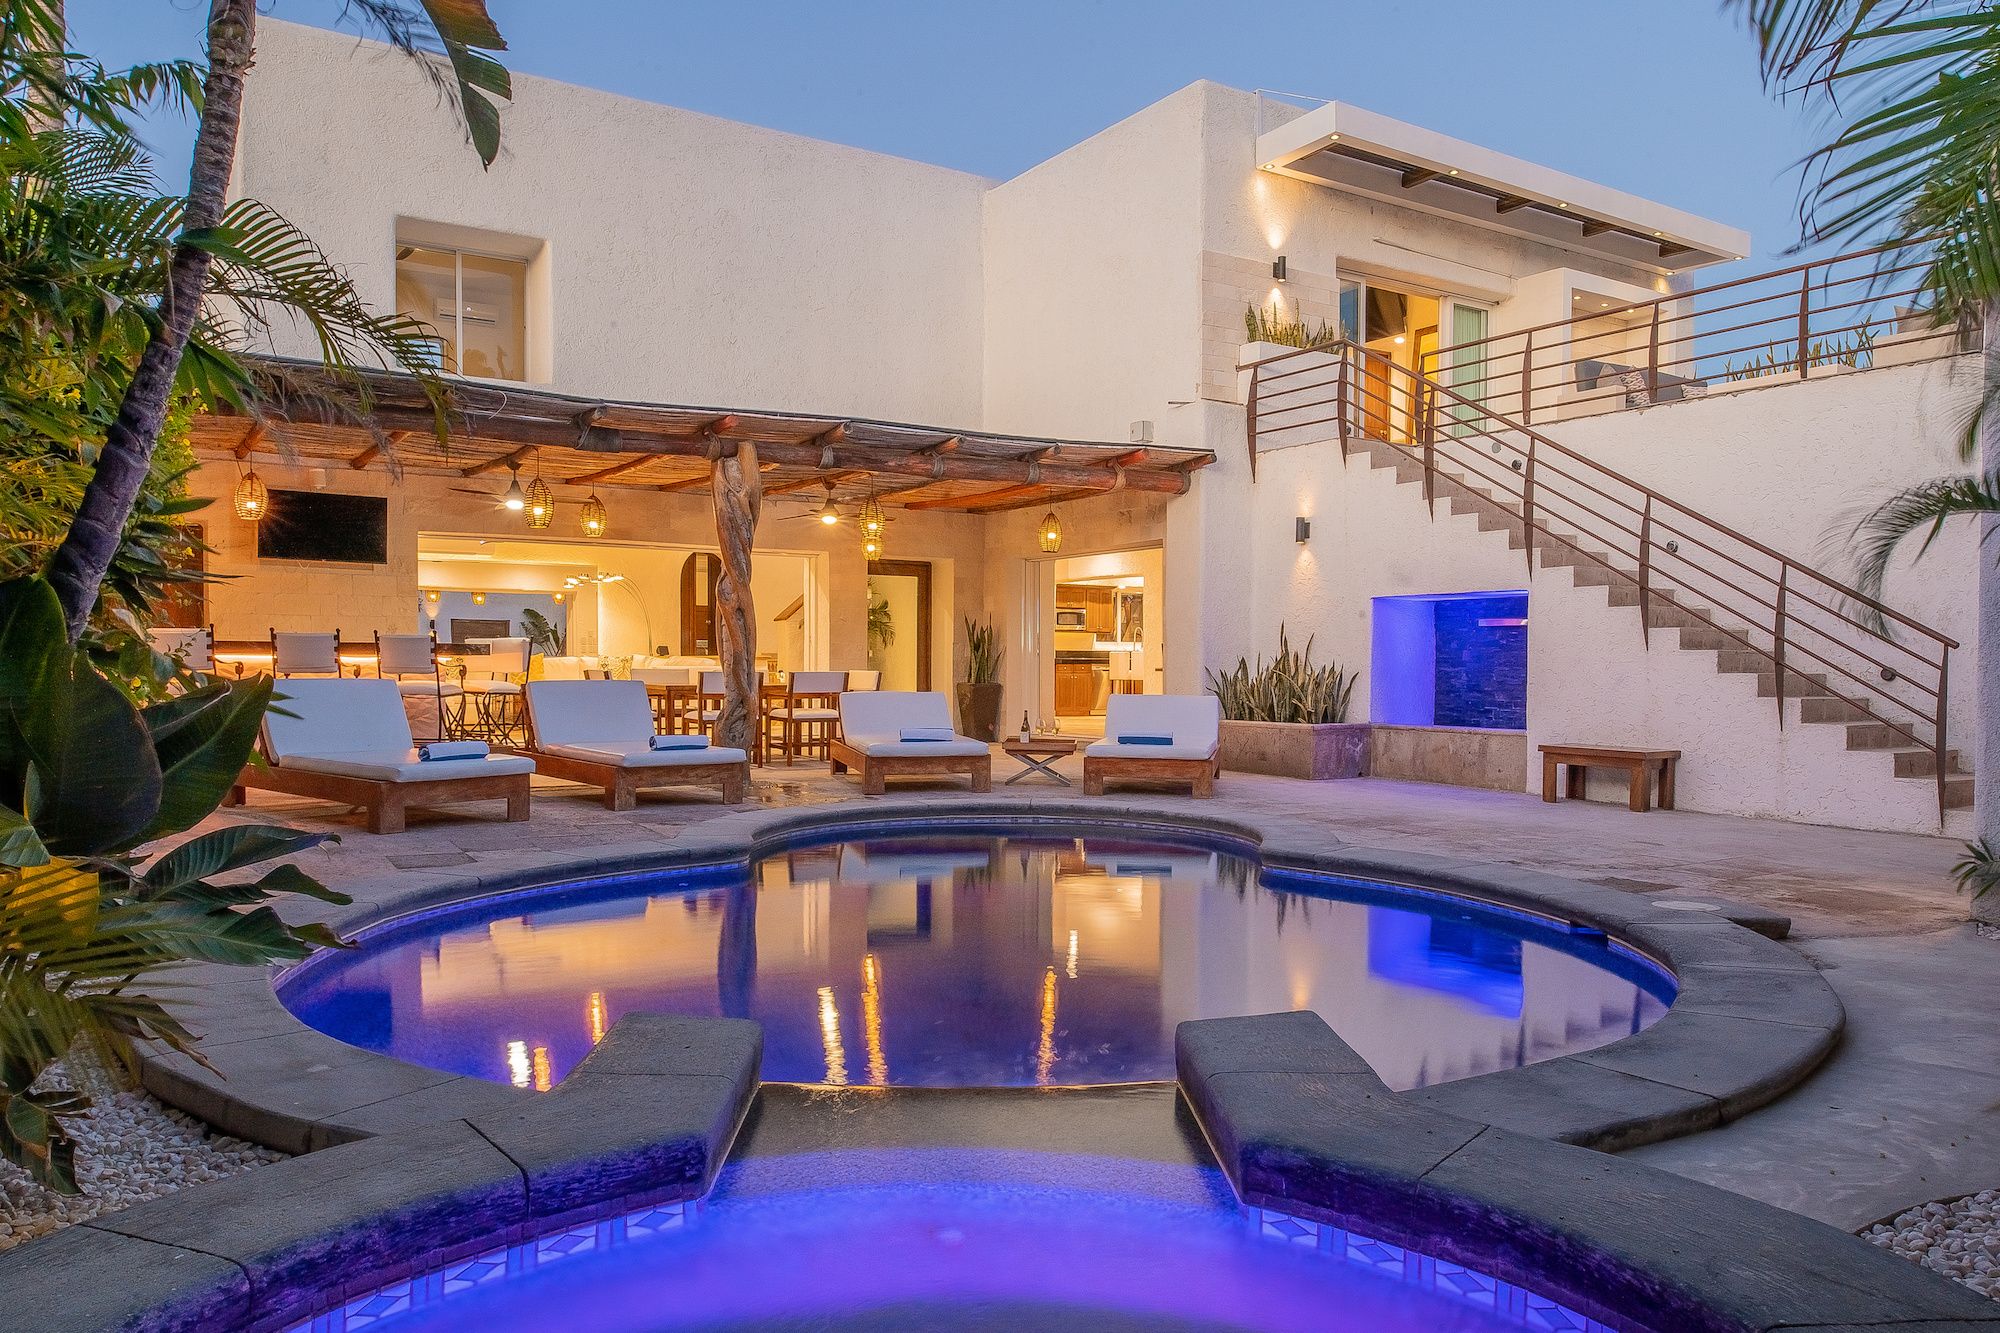 Book Vrbo's 2023 Vacation Homes of the Year: Cabo, New York, more